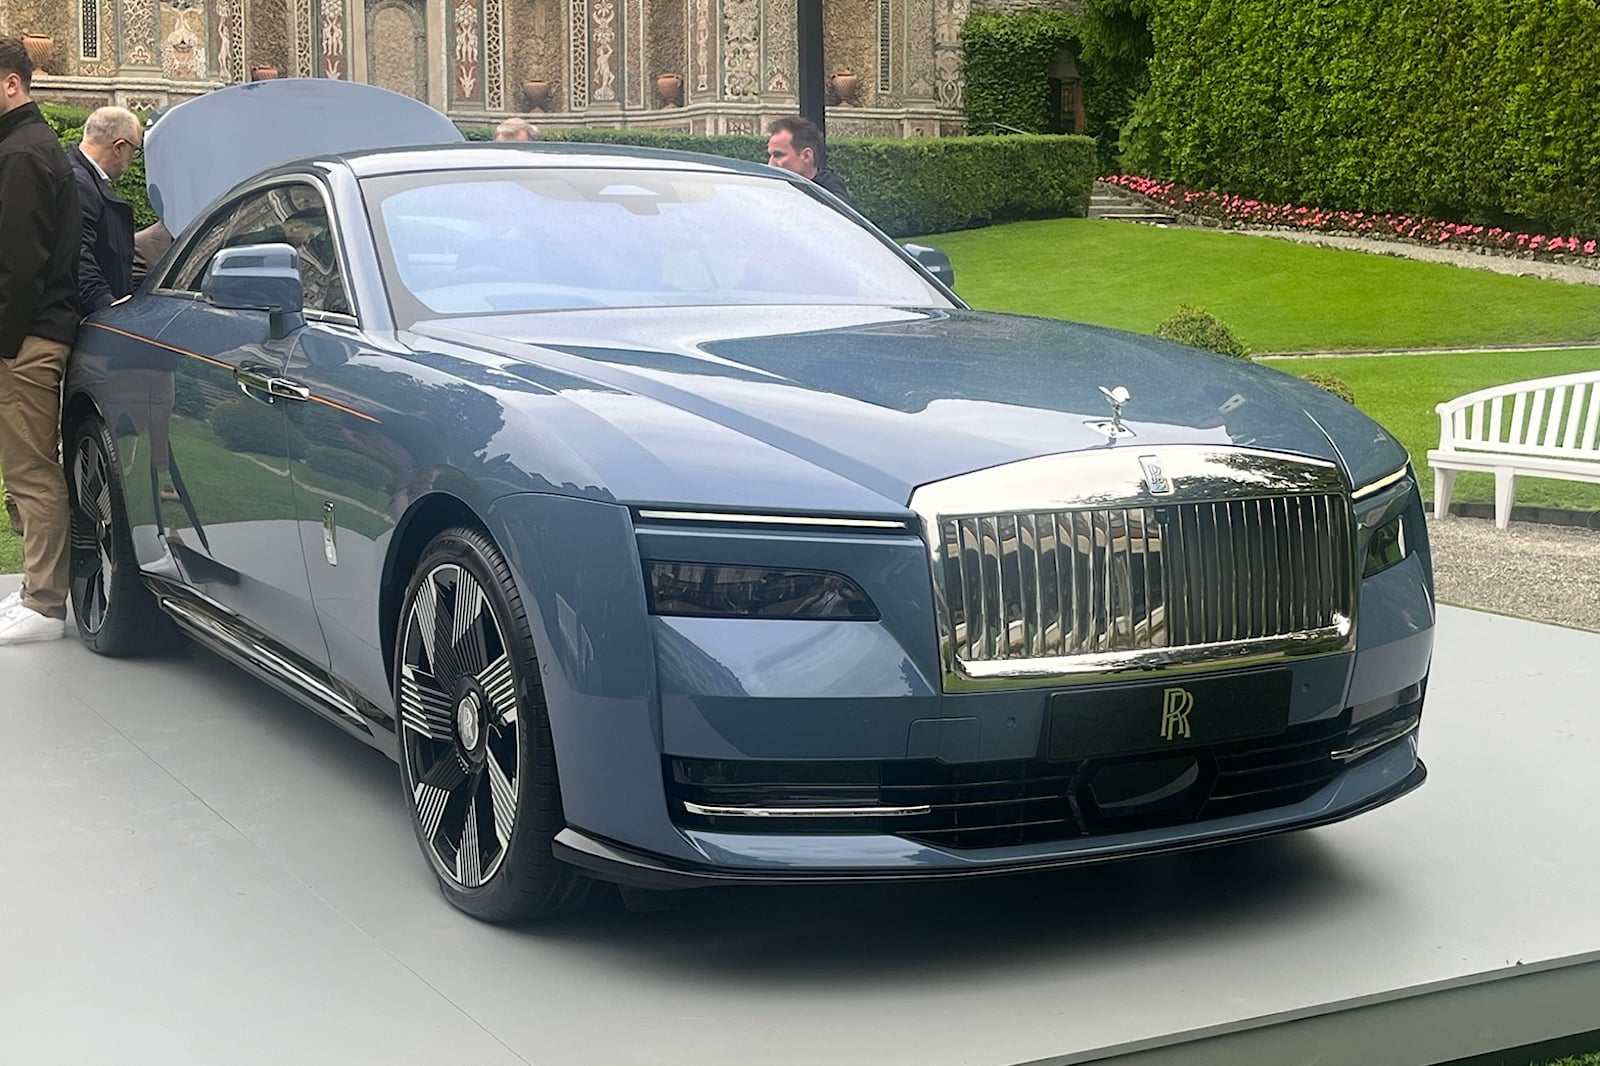 Here's the Most Exclusive Rolls-Royce Phantom Delivered to a US Customer Yet